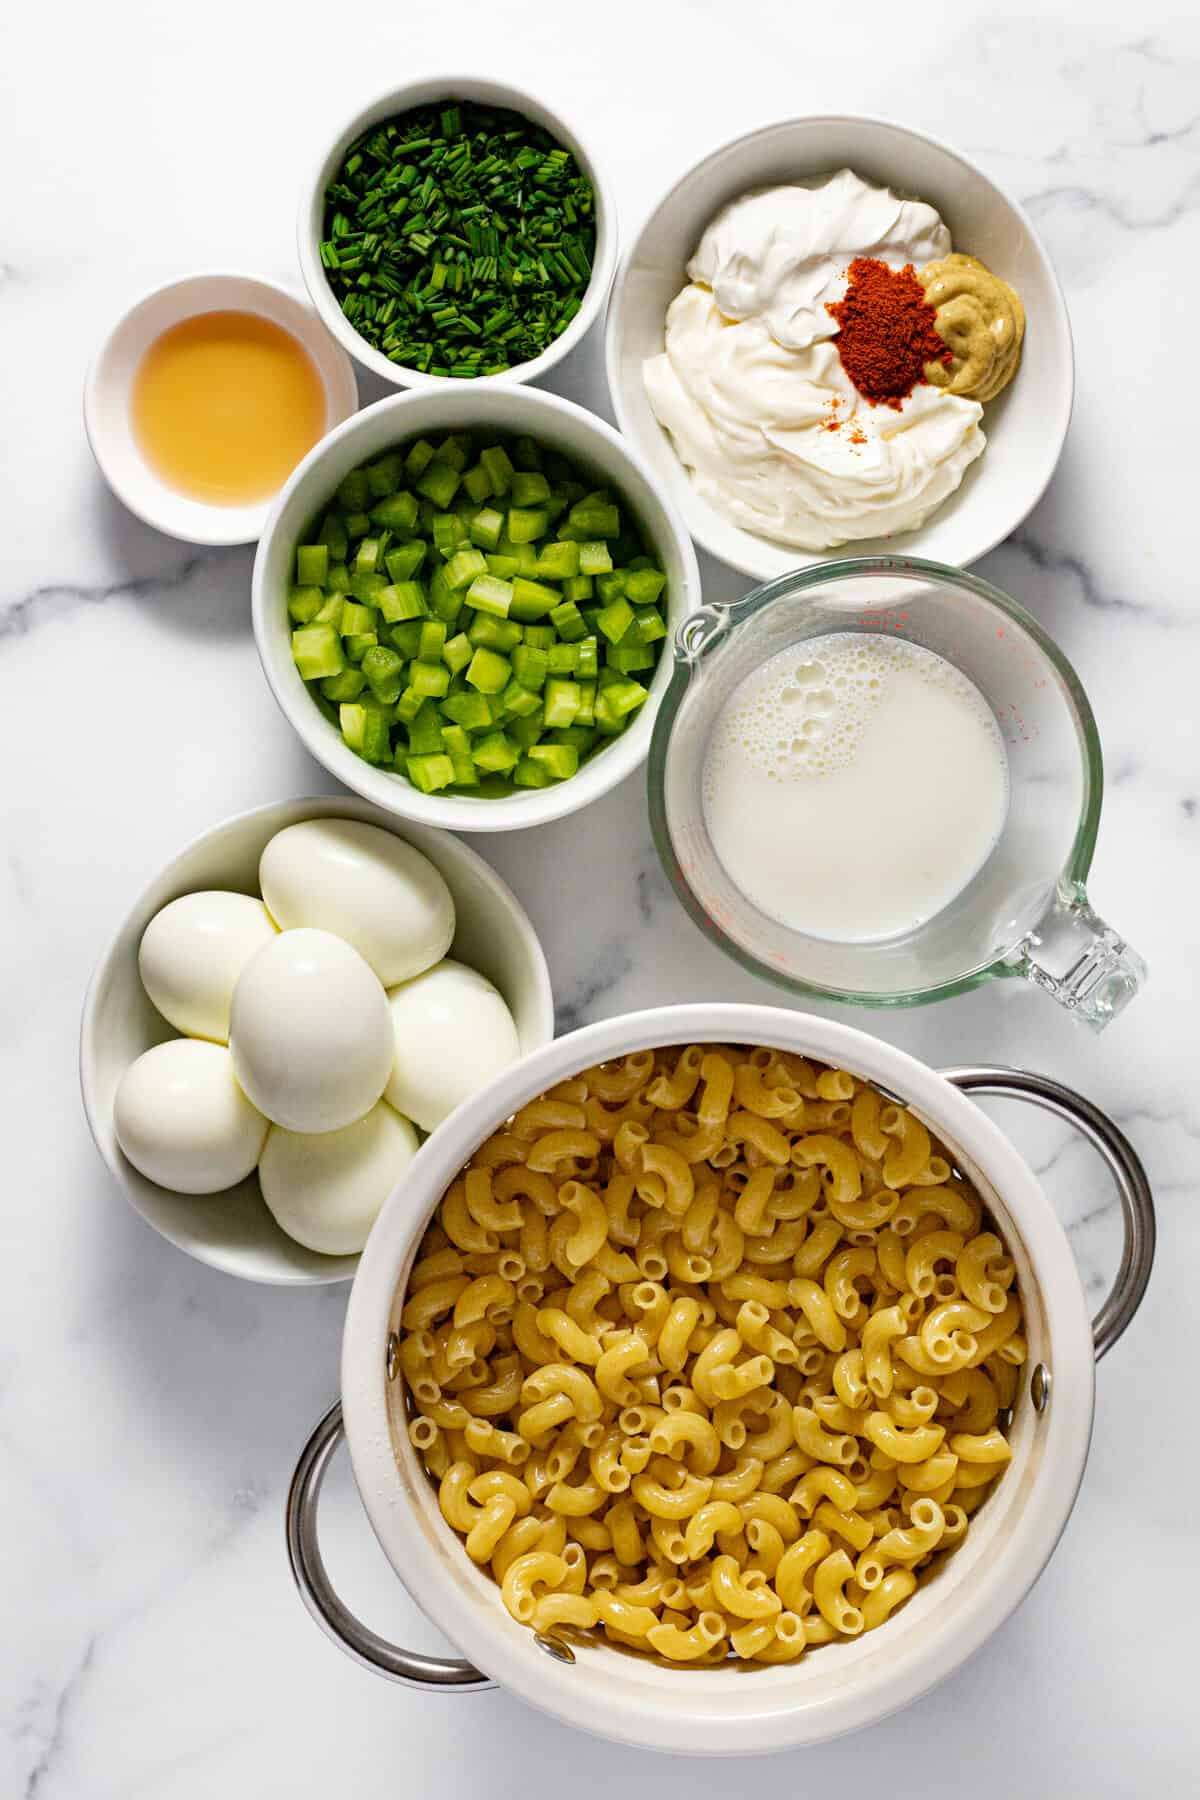 White marble counter top with bowls of ingredients to make deviled egg pasta salad